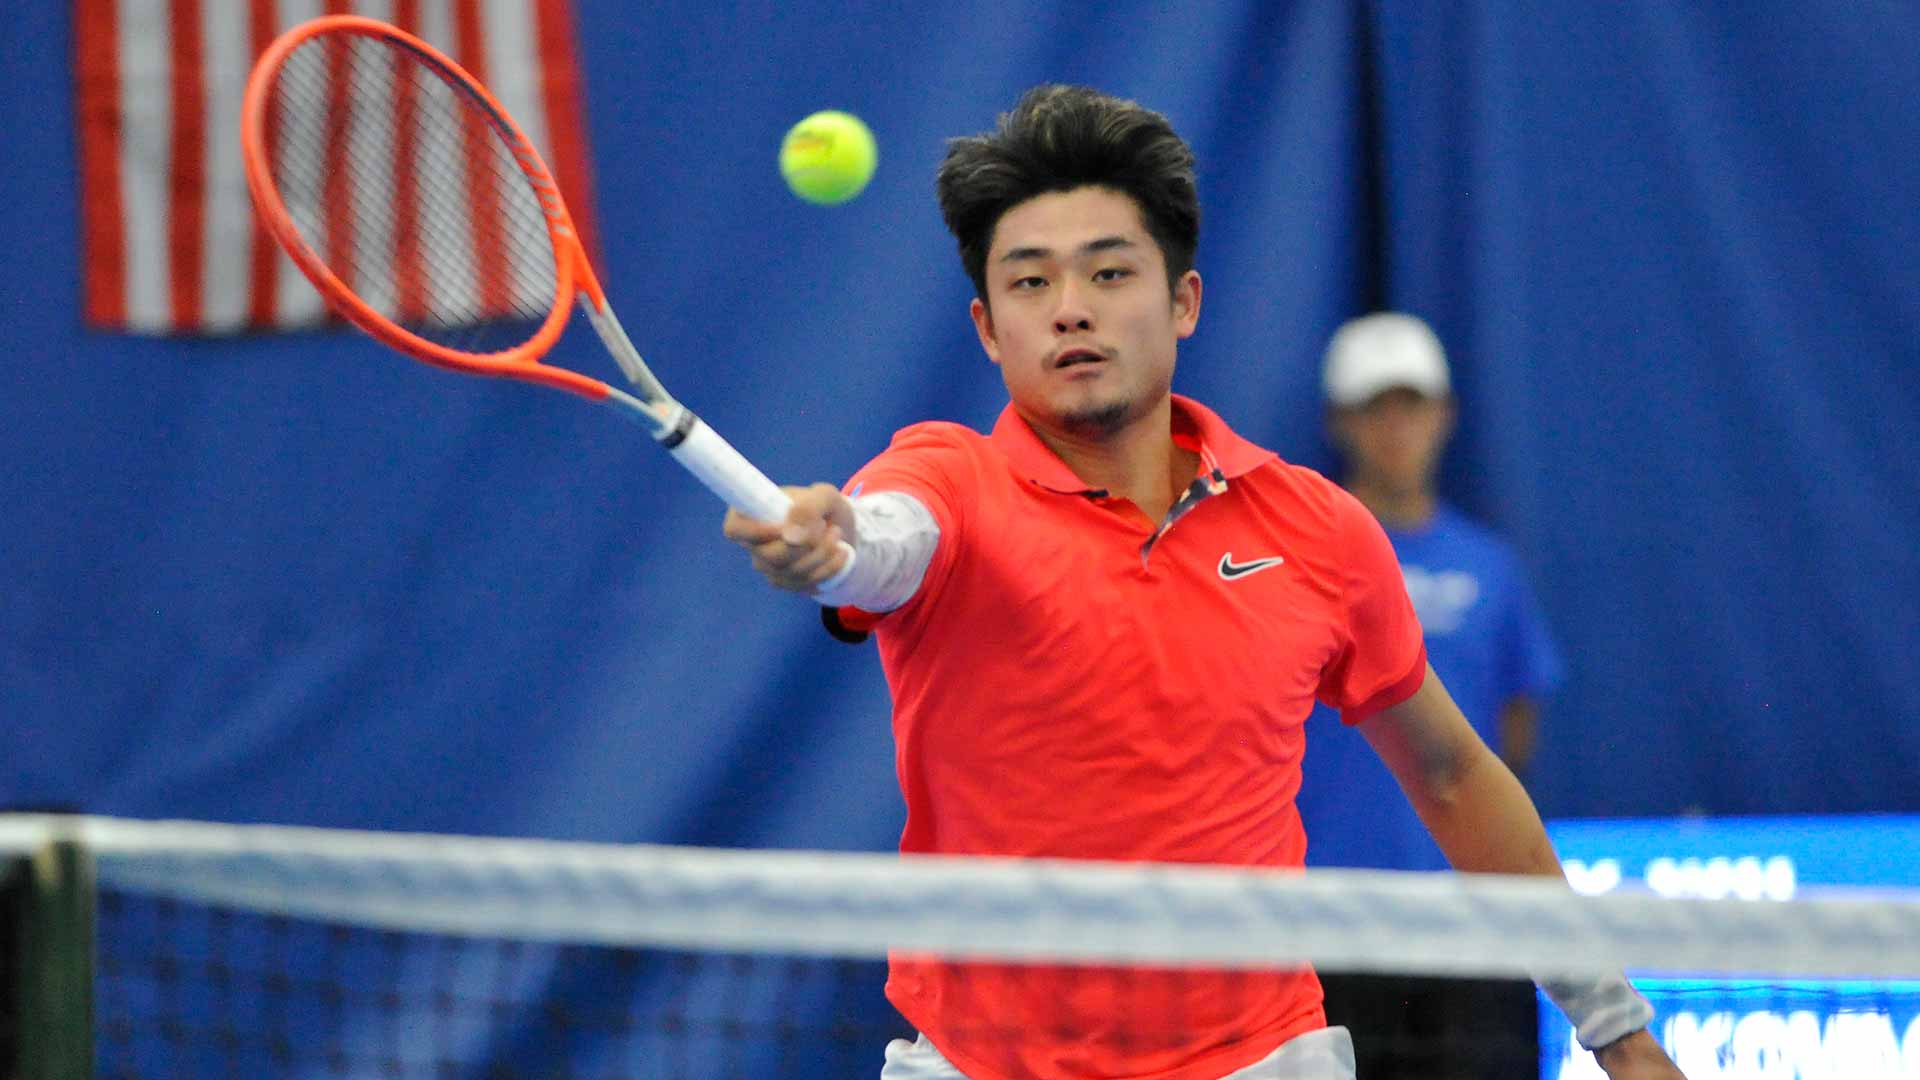 Wu Yibing en route to a dramatic ATP Challenger Tour victory in Indianapolis on Sunday.